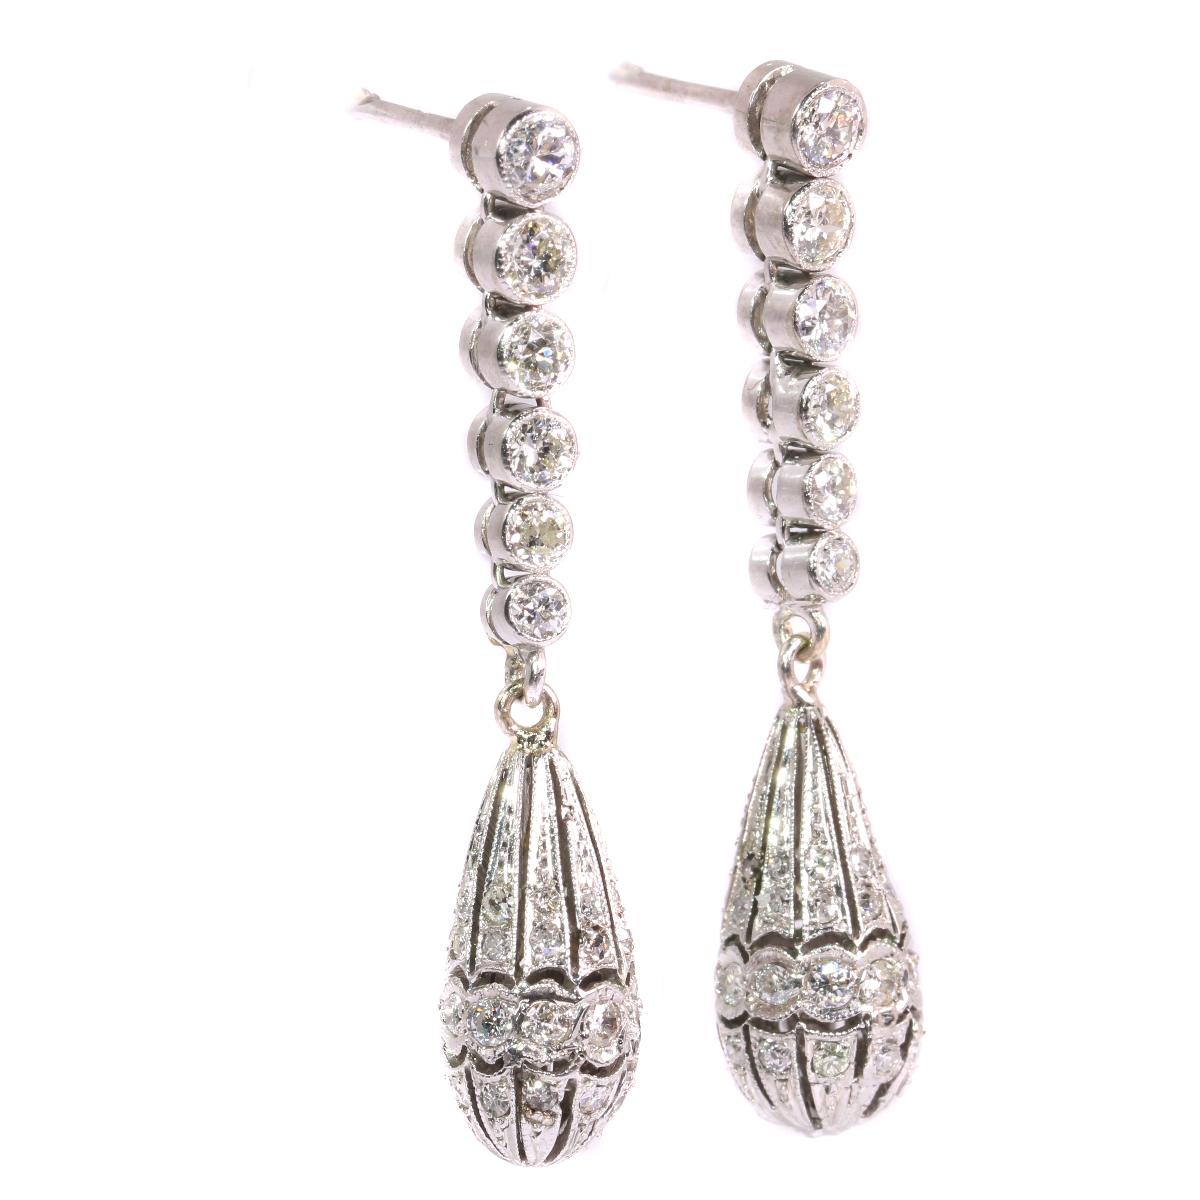 Magnificent Art Deco 2.14 Carat Diamond Pendent Earrings In Excellent Condition For Sale In Antwerp, BE